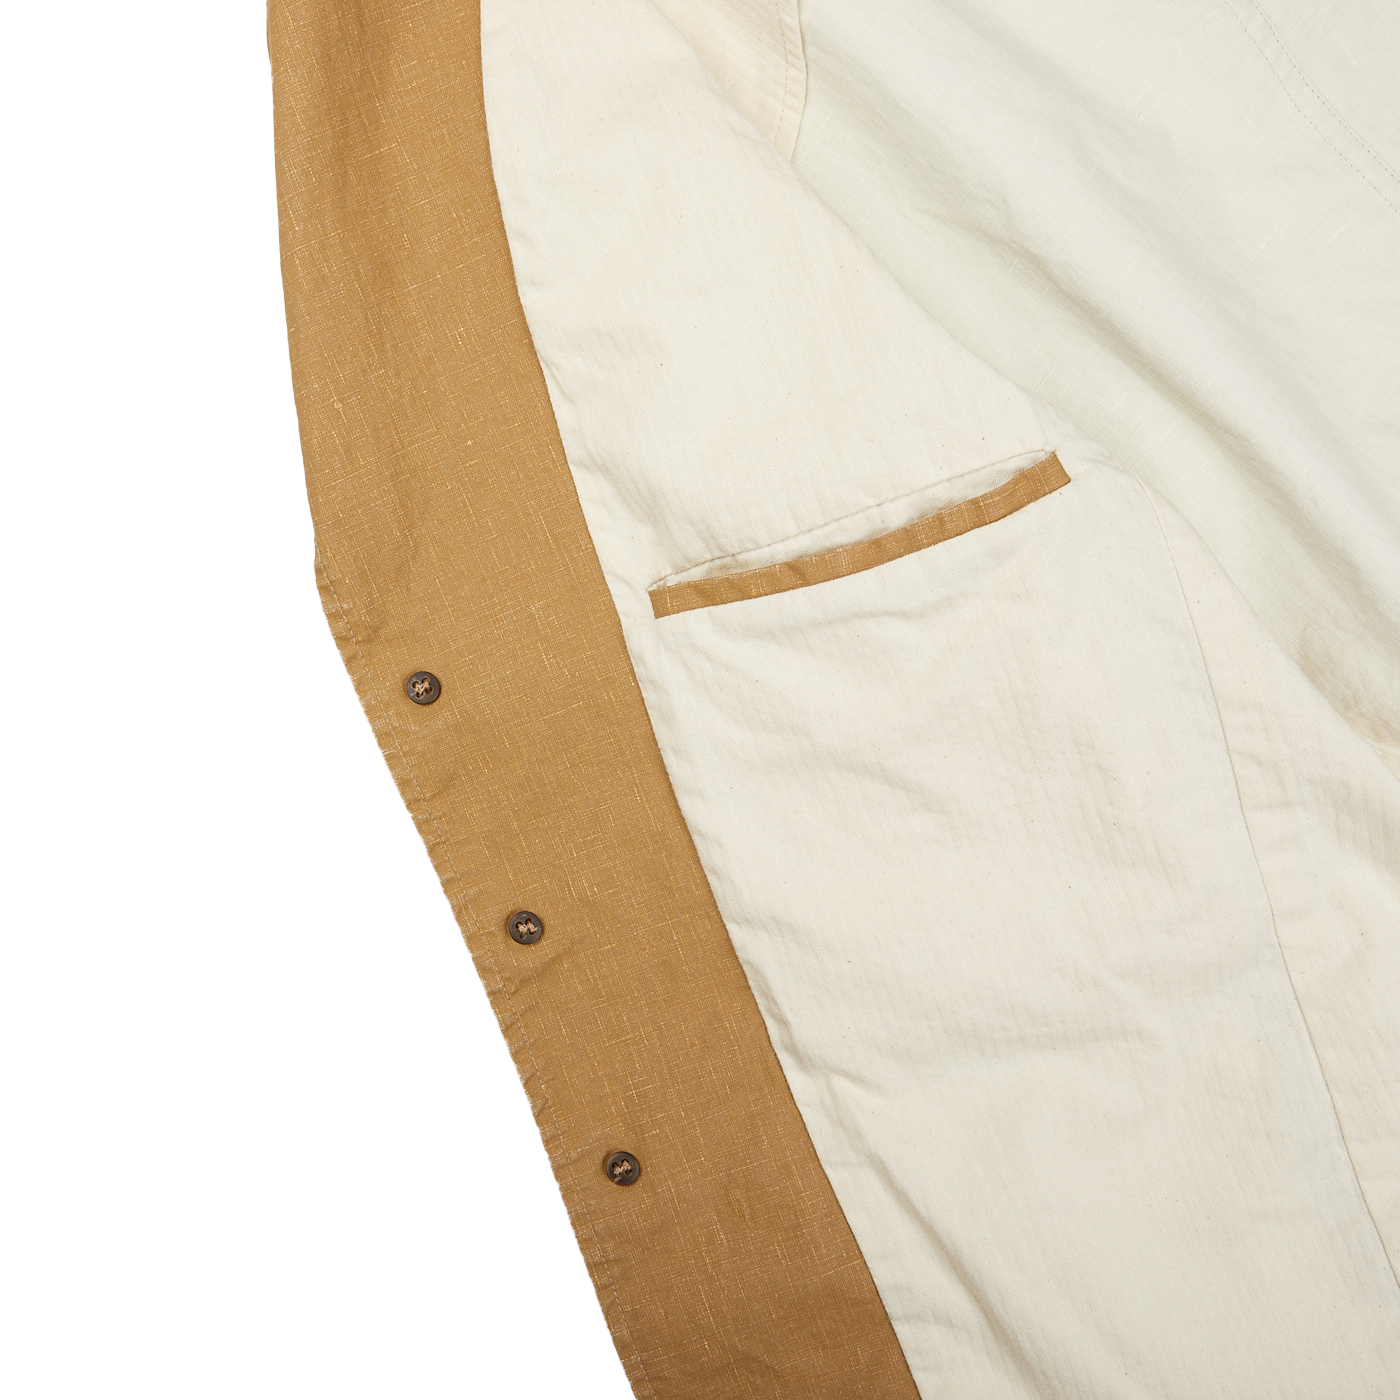 A L'Impermeabile water-resistant jacket on a white background.